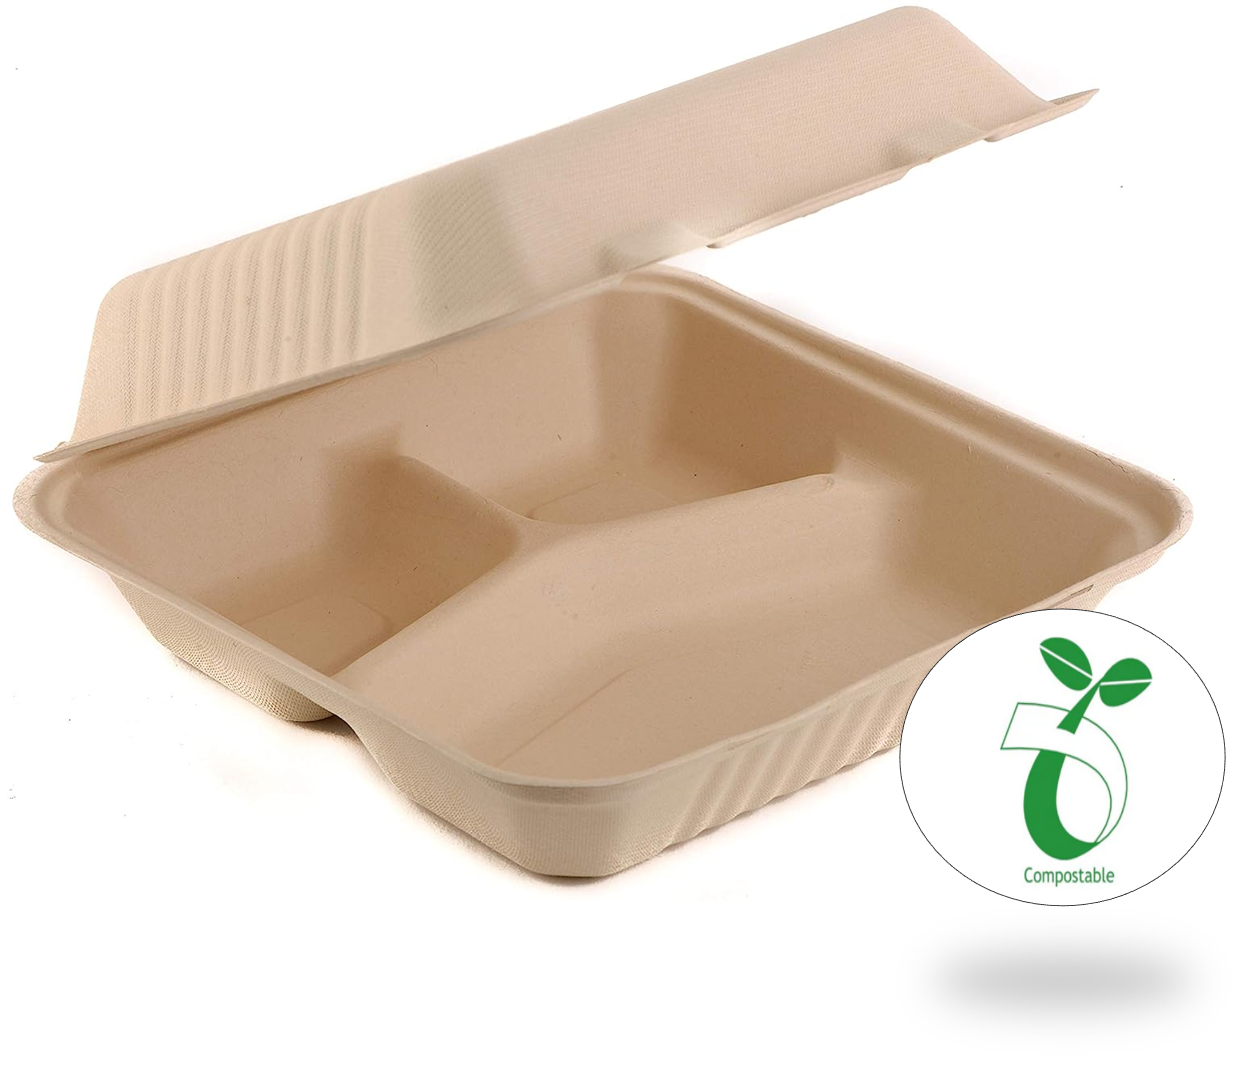 Reduce landfill with these compostable 3-compartment 8-in x 8-in x 3-in Bagasse Hinged Clamshell Food Containers constructed with reclaimed sugarcane.